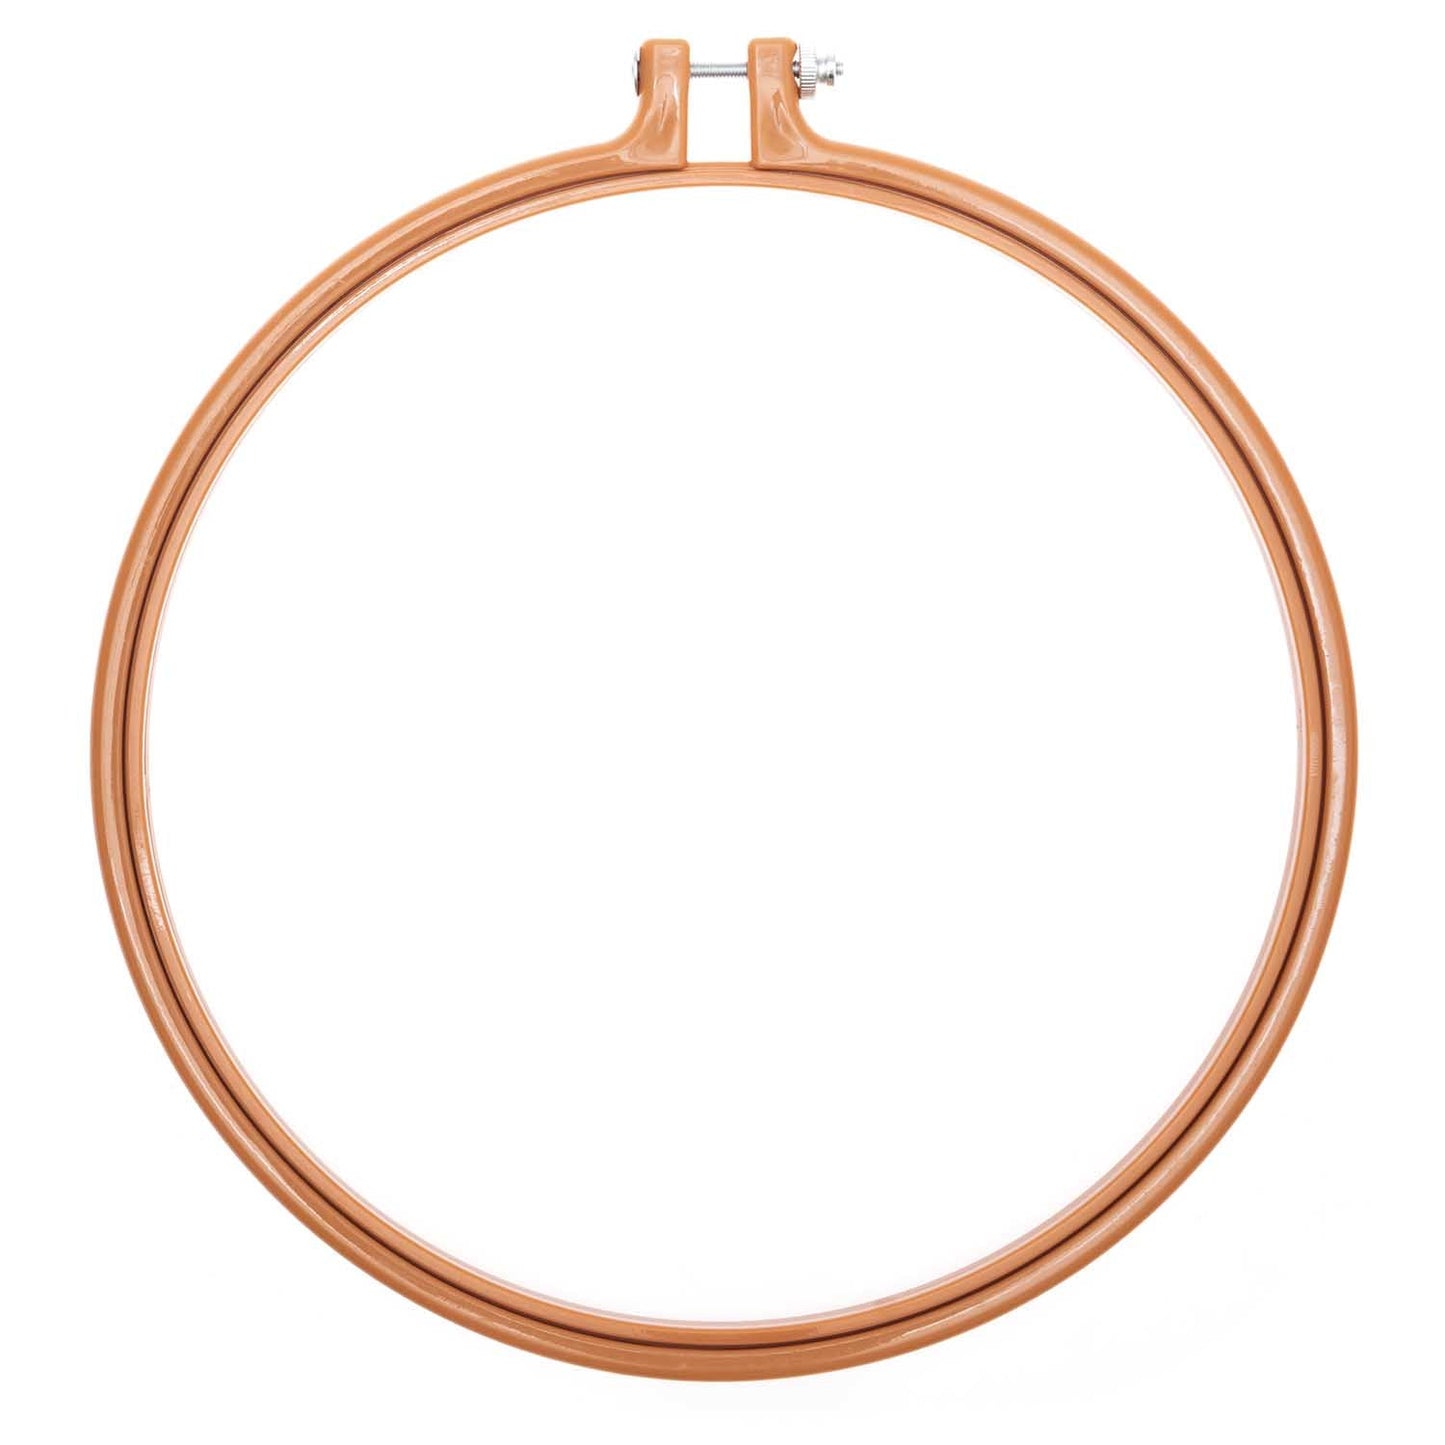 Caramel Coloured Embroidery Hoop 23cm / 9" - by Rico Design - Stitch Happy.